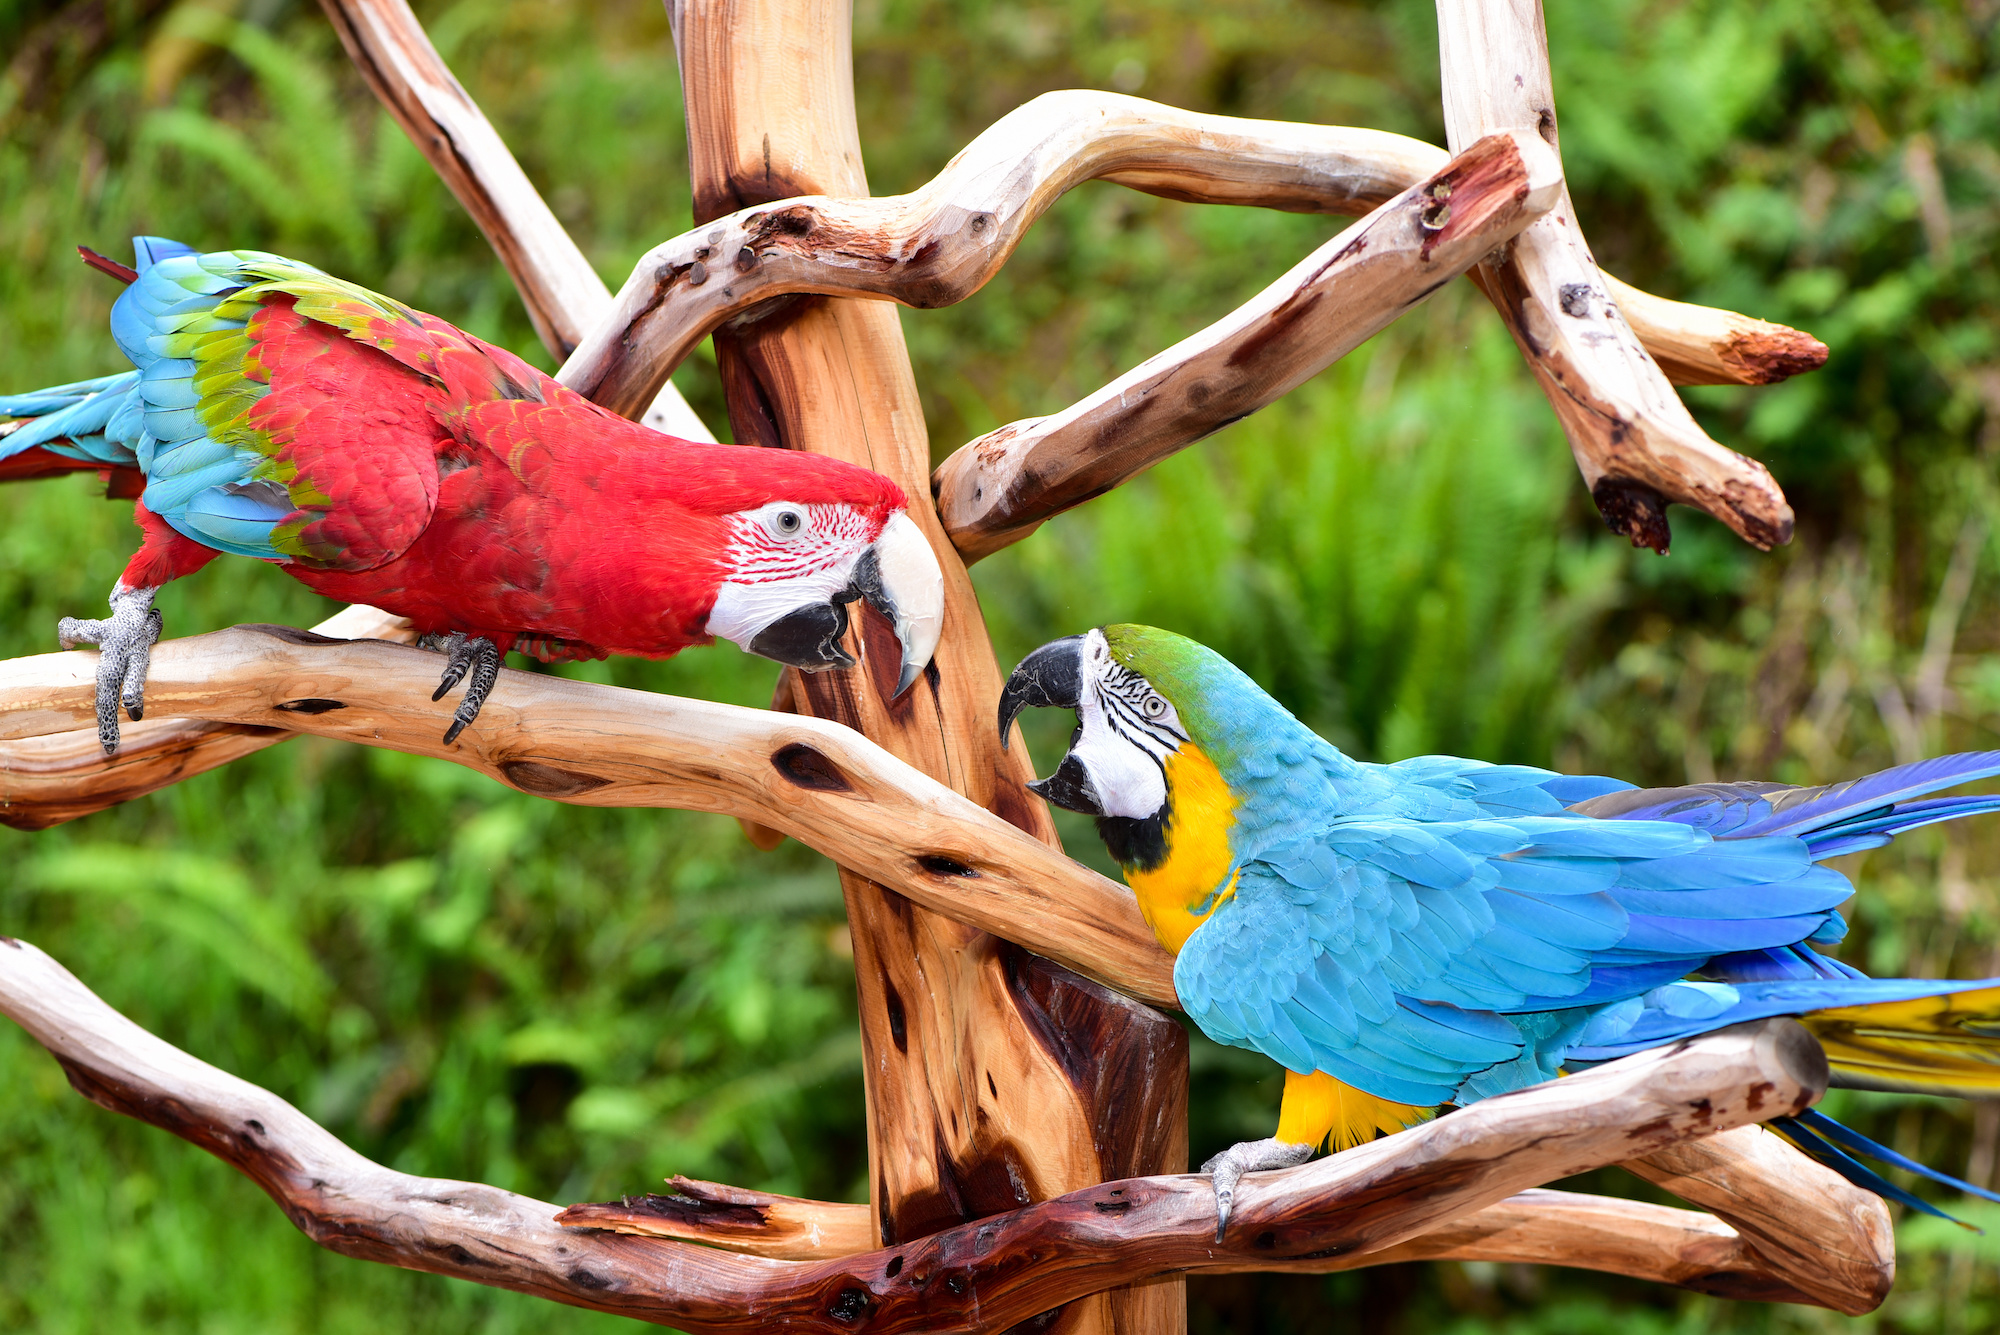 30 Colorful Facts About Parrots - The Fact Site